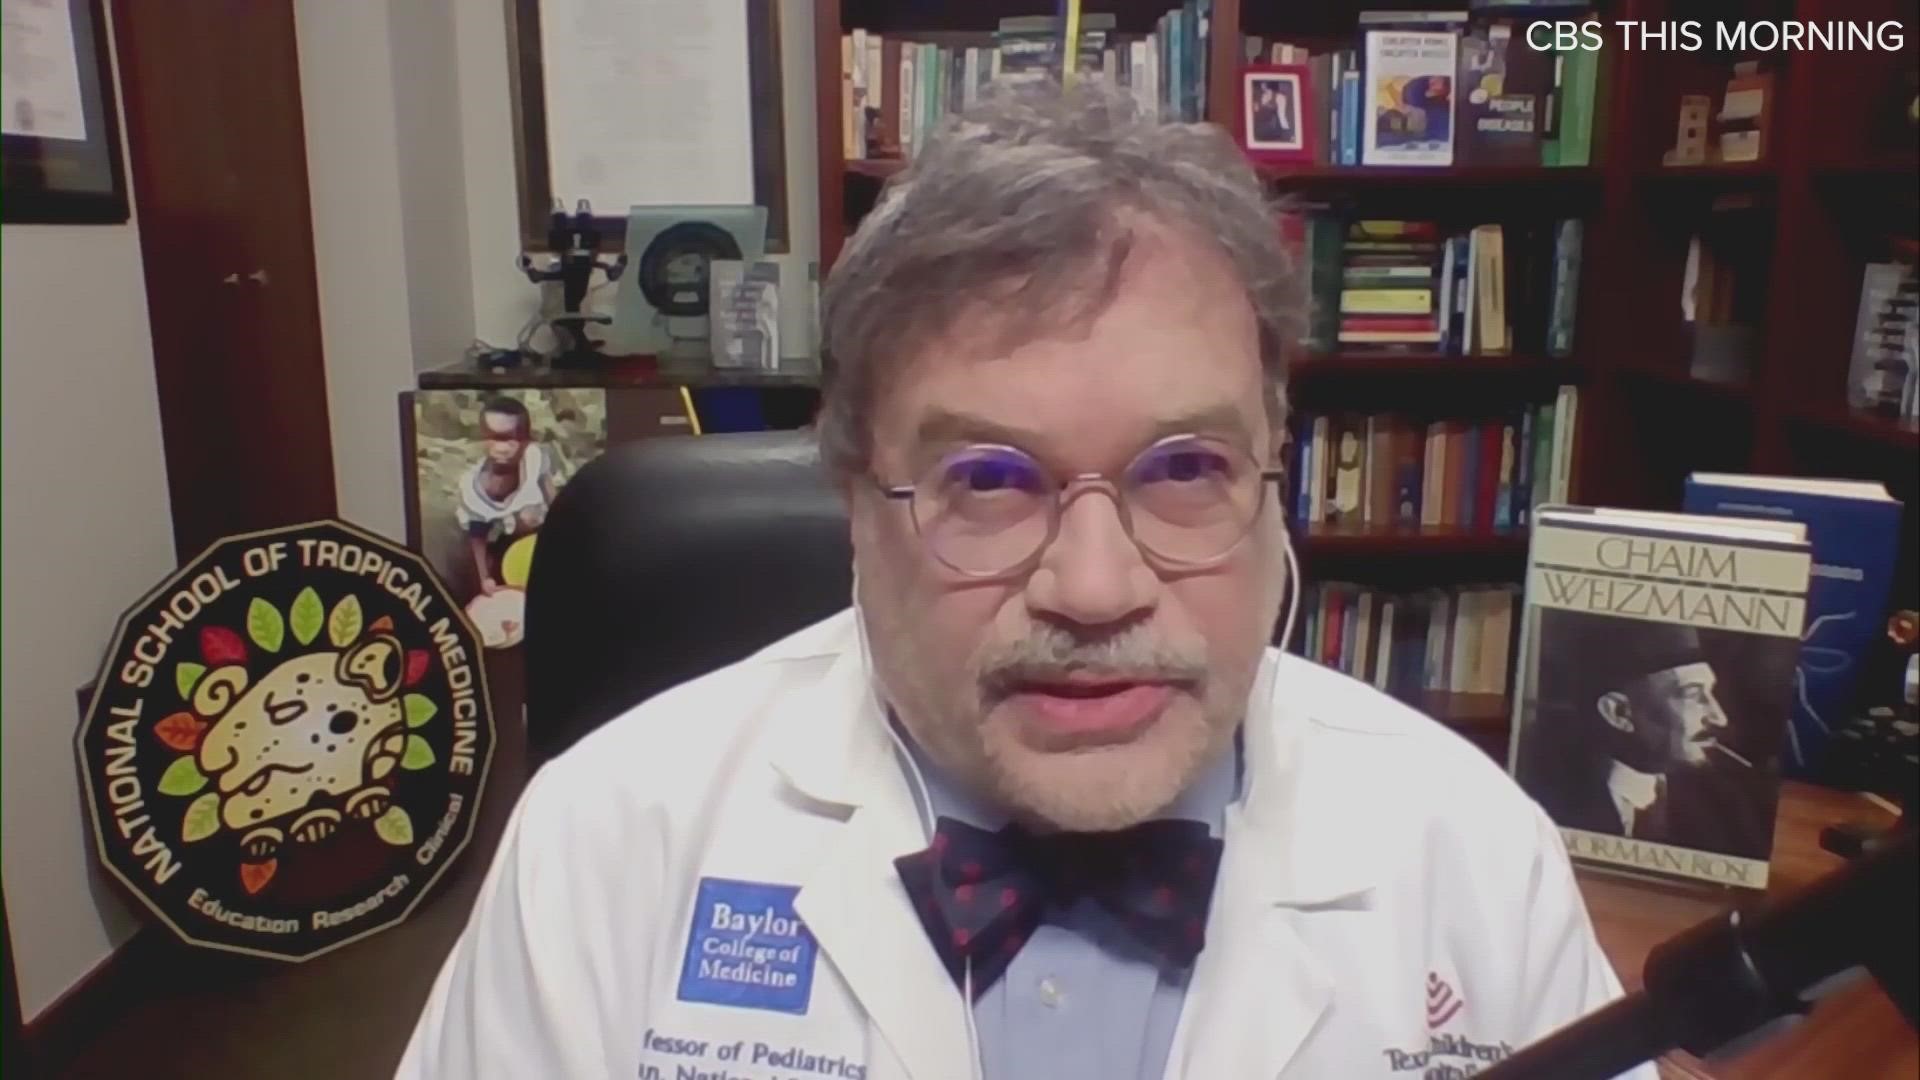 In an interview on CBS This Morning, Dr. Hotez talked about the vaccine booster shots and the Biden administration's plan